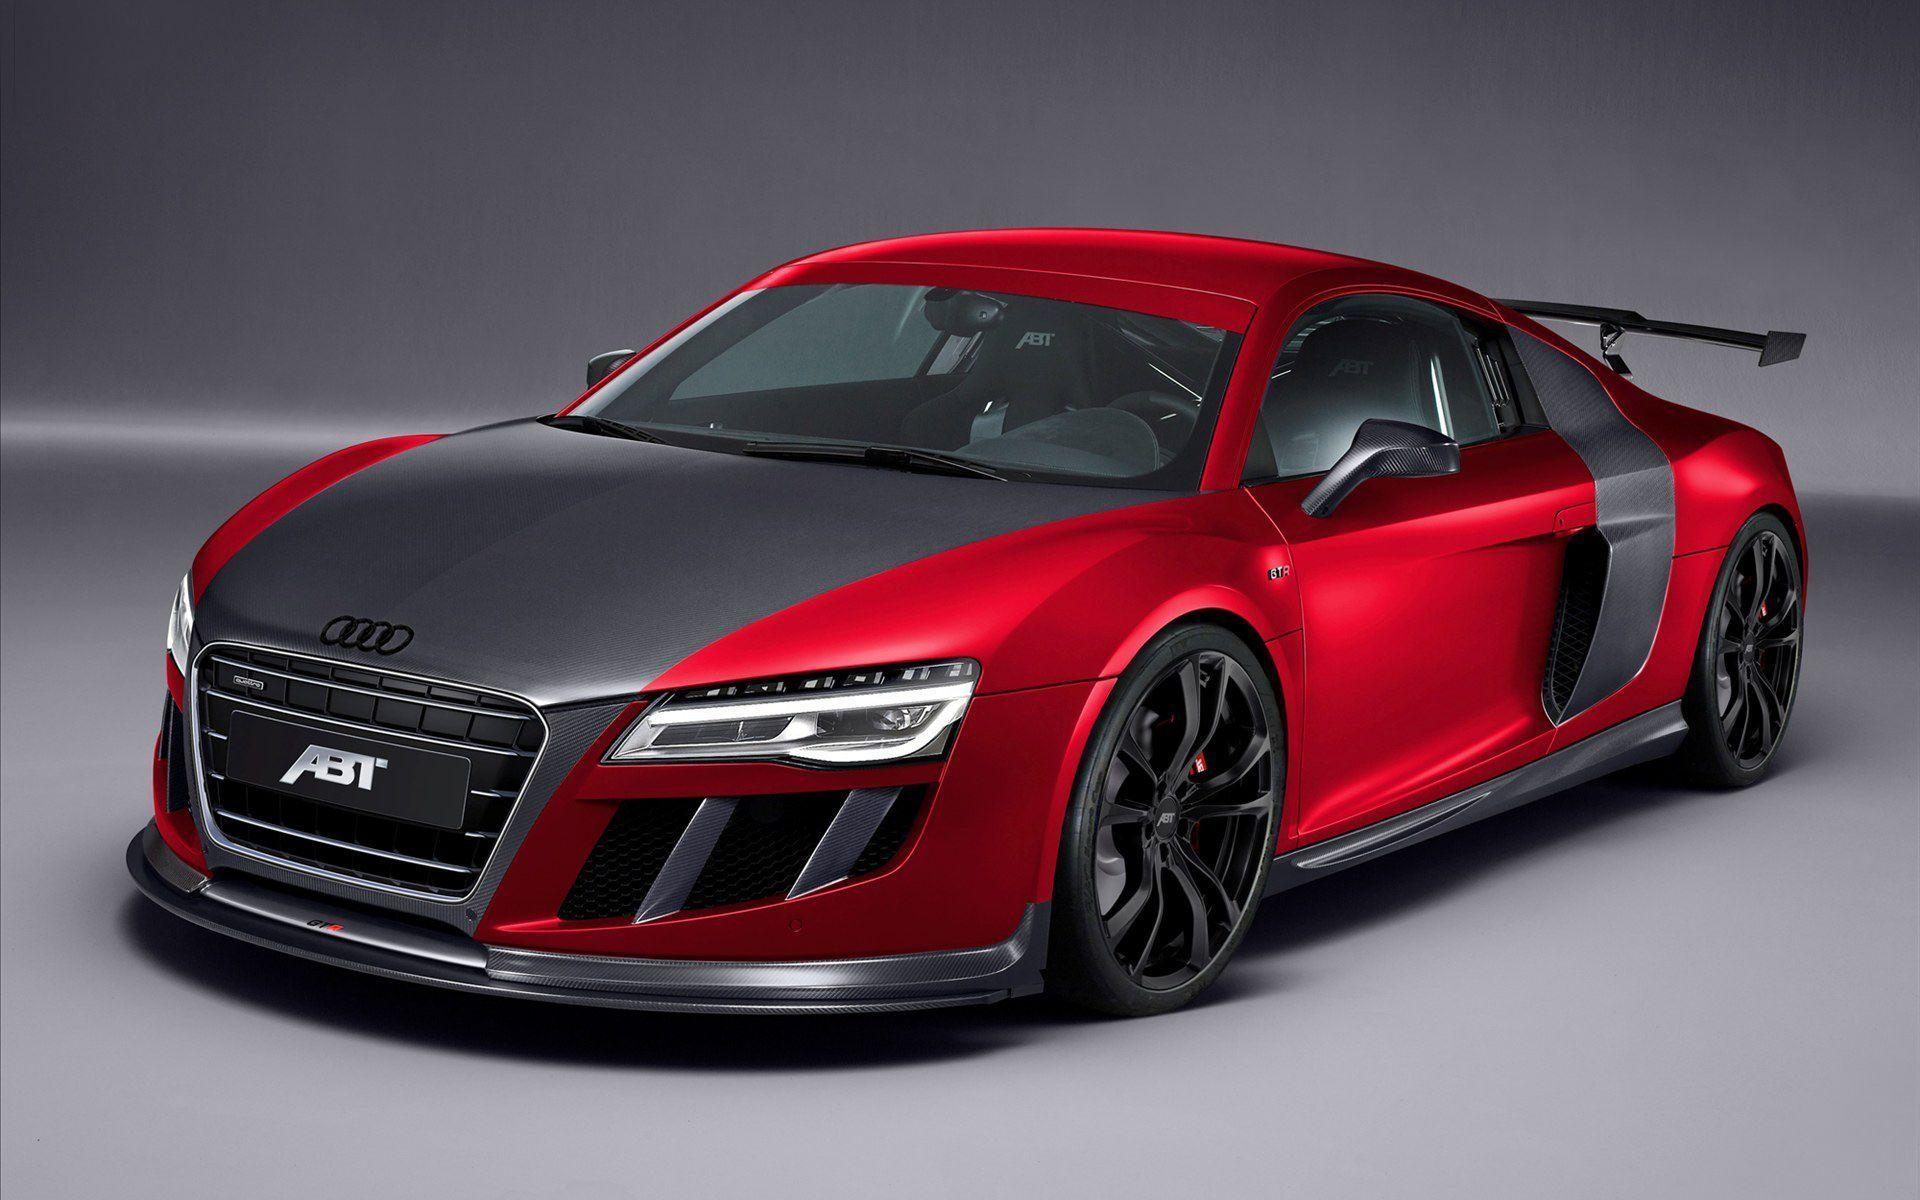 Amazing Red Car Audi R8 Sport Wallpapers HD Wallpapers